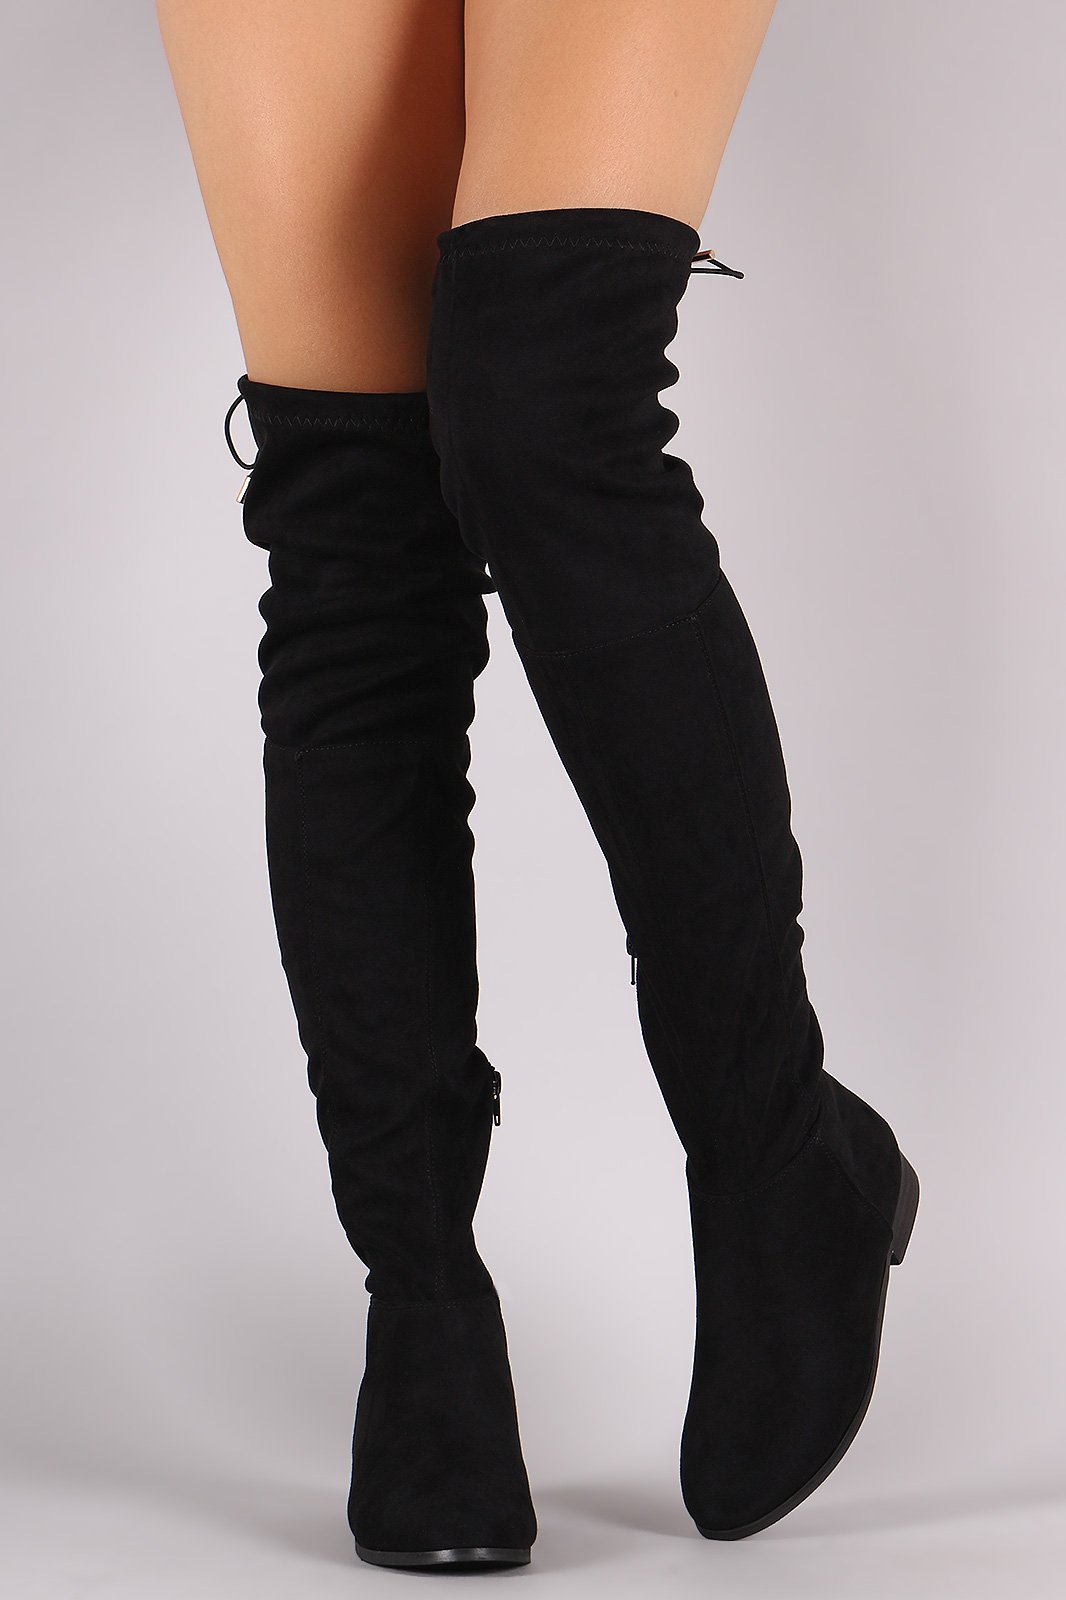 Suede Drawstring Tie Over-The-Knee Riding Boots